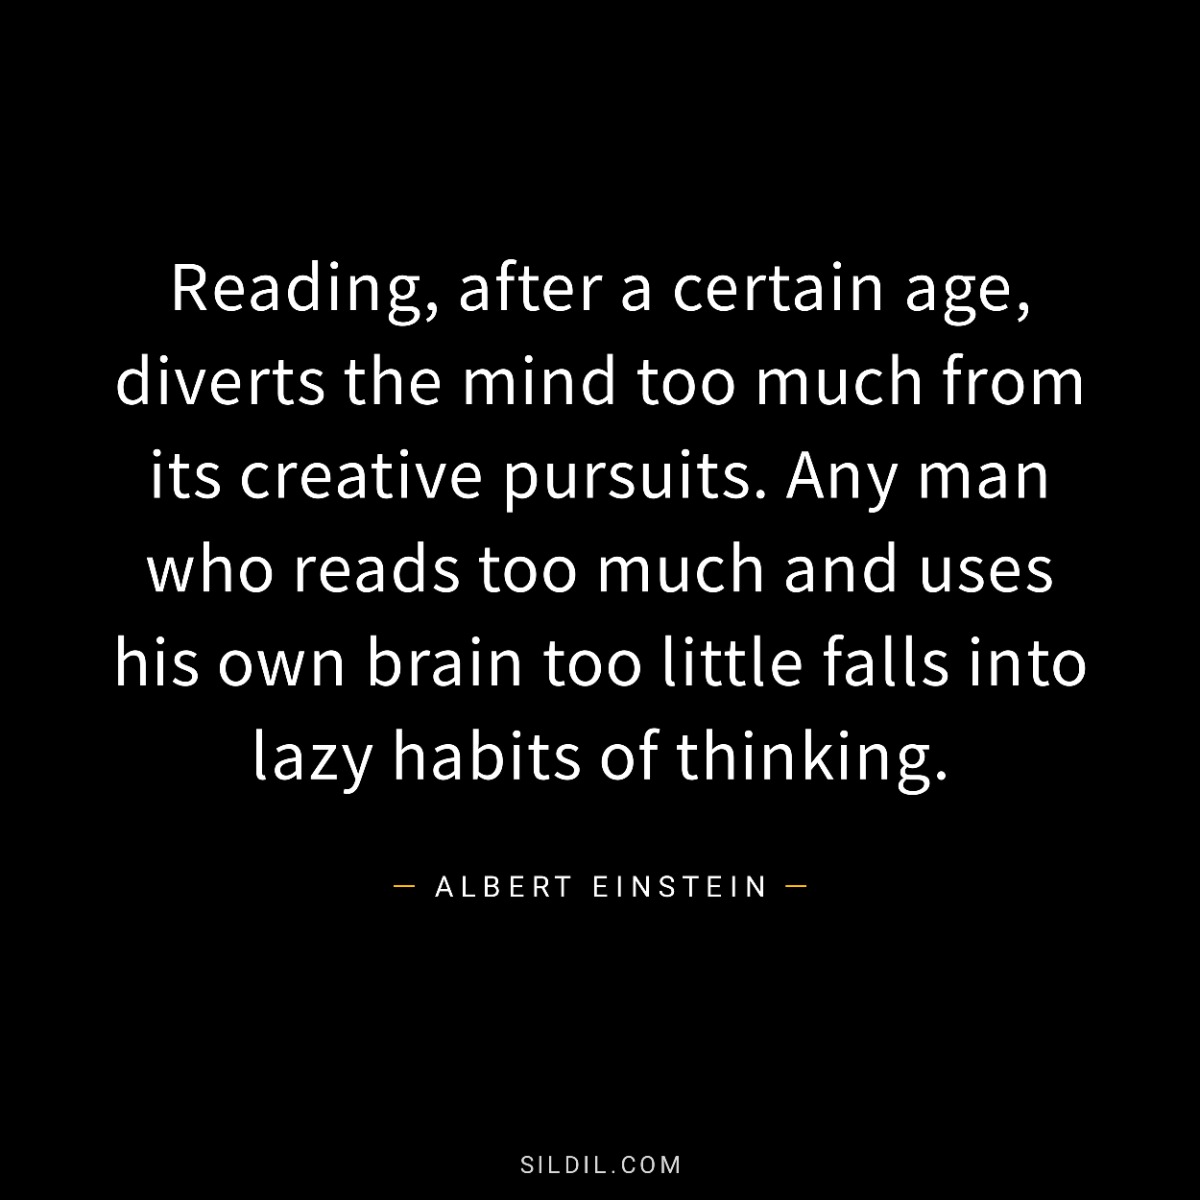 Reading, after a certain age, diverts the mind too much from its creative pursuits. Any man who reads too much and uses his own brain too little falls into lazy habits of thinking.